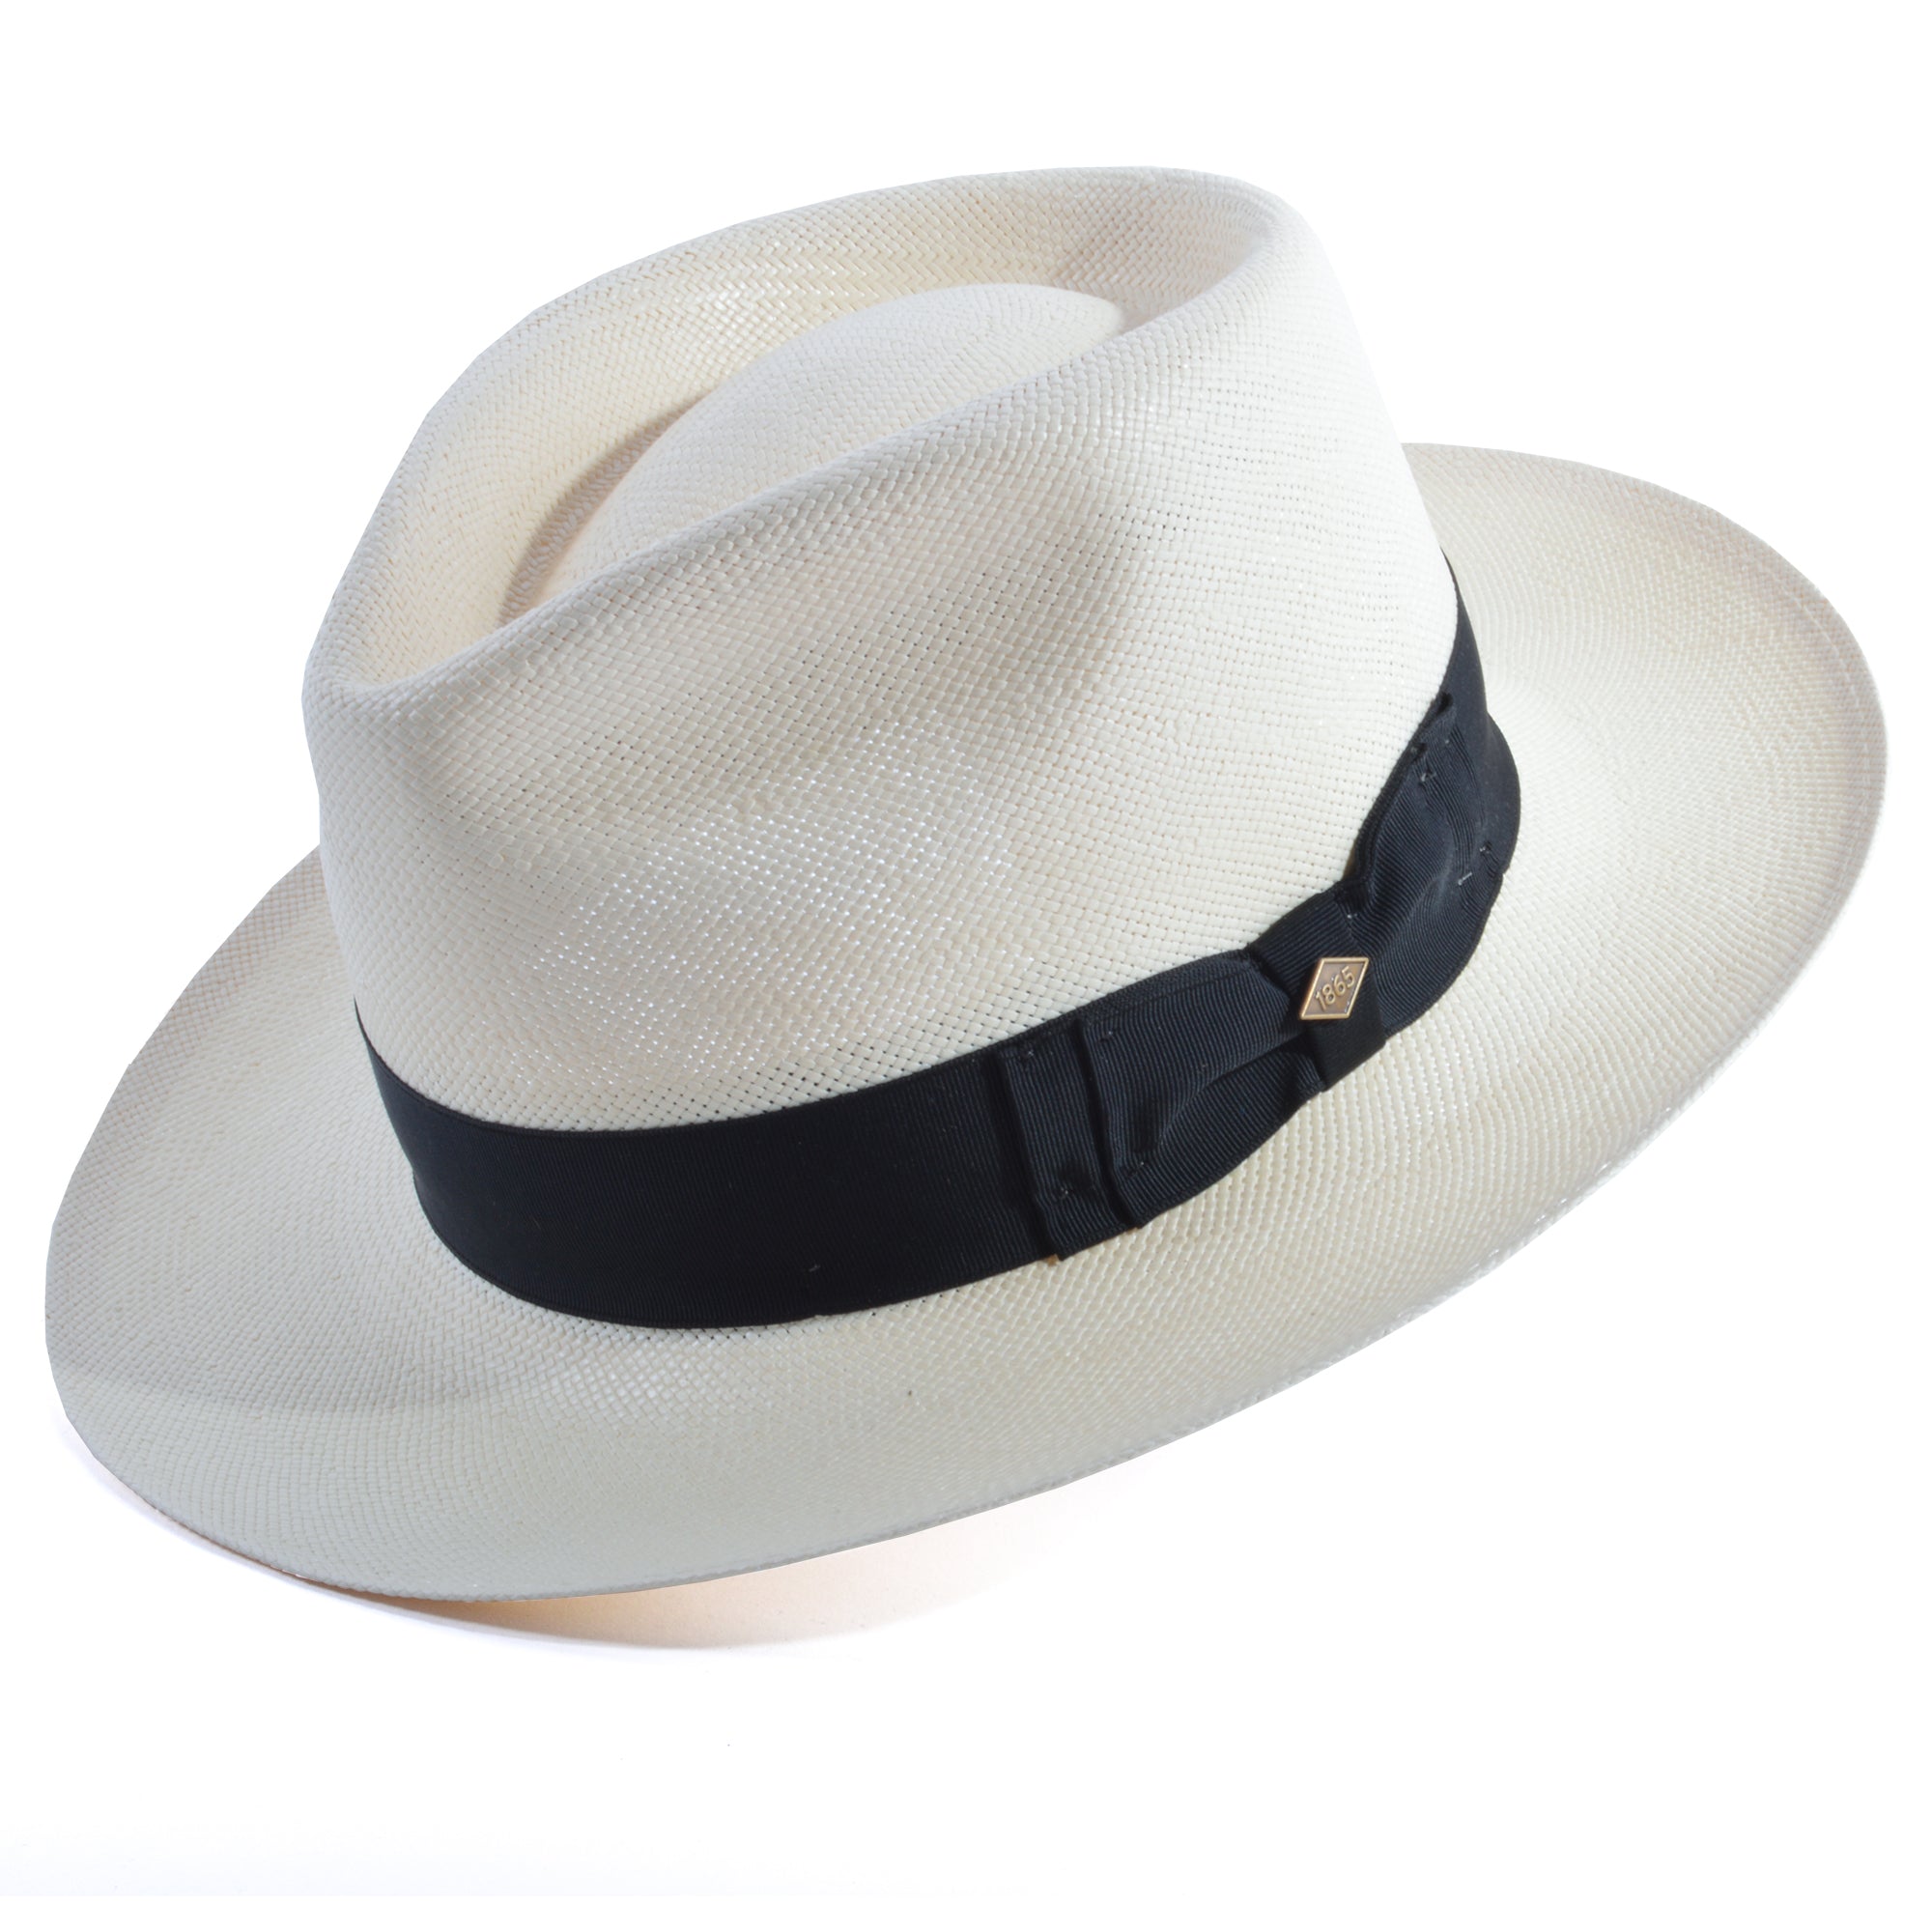 Buy BOXO Fedora Hats for Men and Boys for Travel and Picnic Use Pack of 1  (Fedora hat-1) Pack of 1 at